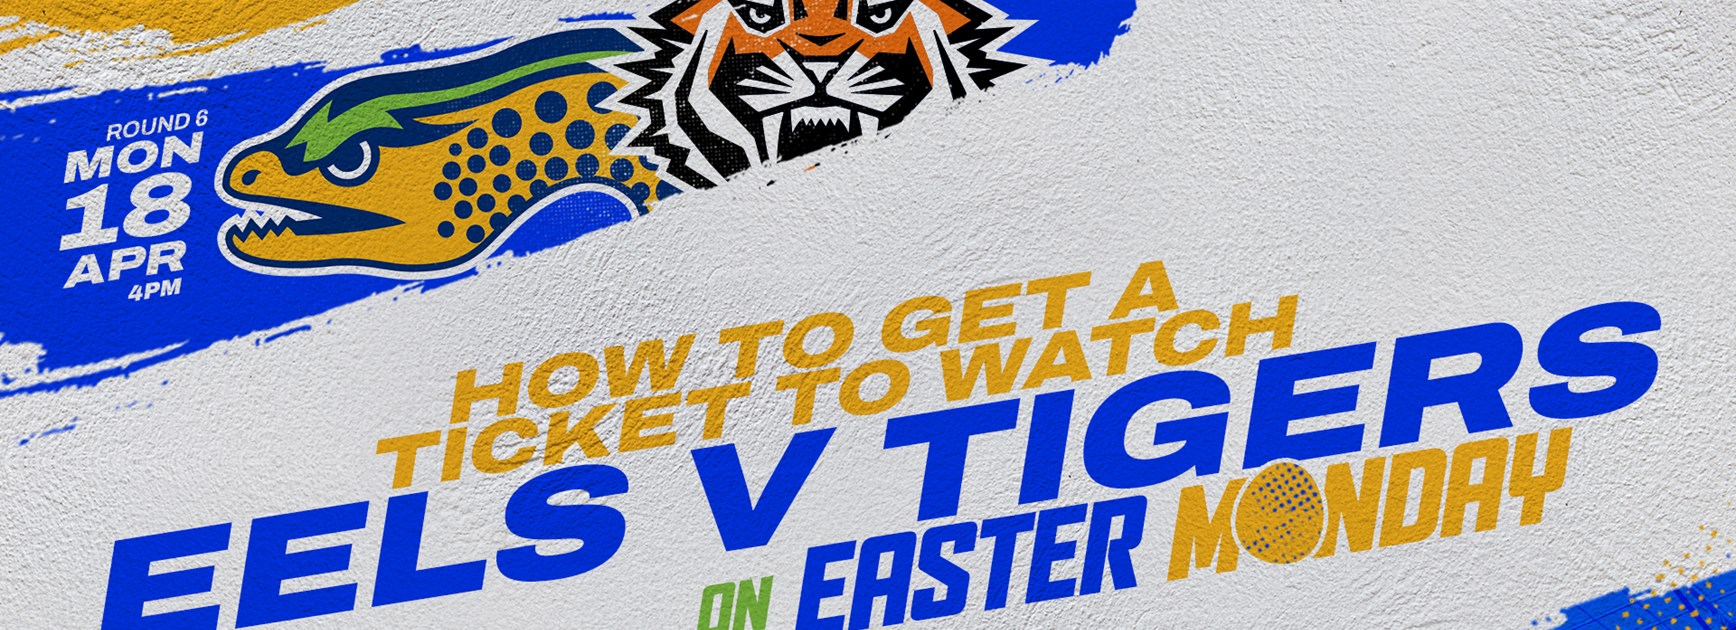 How to get a ticket to Eels v Tigers Easter Monday Clash